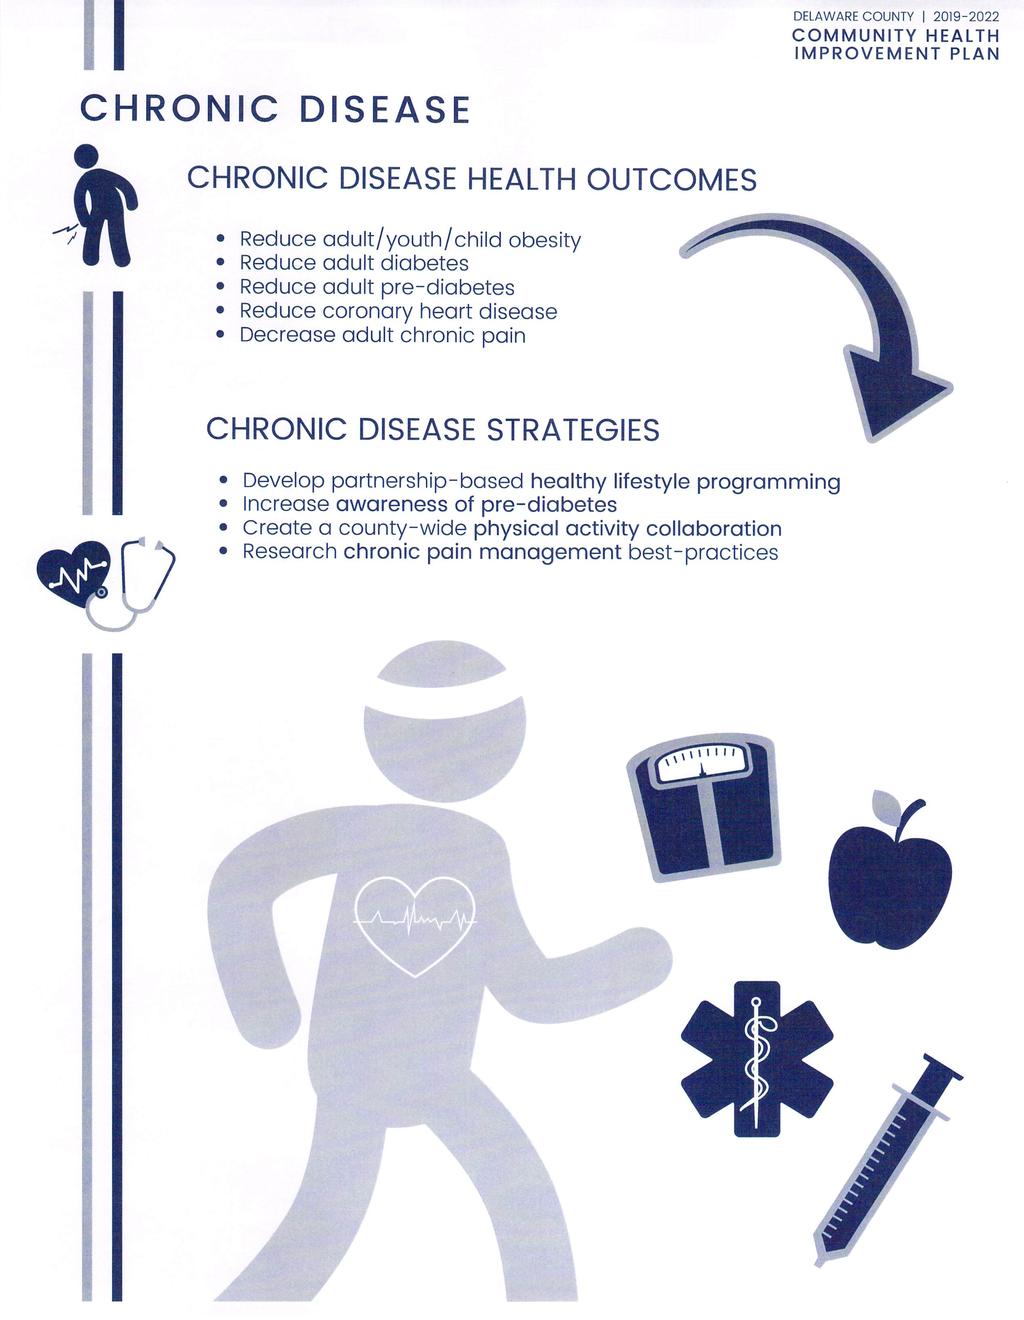 DELAWARE COUNTY 2019-2022 COMMUNITY HEALTH IMPROVEMENT PLAN CHRONIC DISEASE CHRONIC DISEASE HEALTH OUTCOMES Reduce adult/youth/child obesity Reduce adult diabetes Reduce adult pre-diabetes Reduce